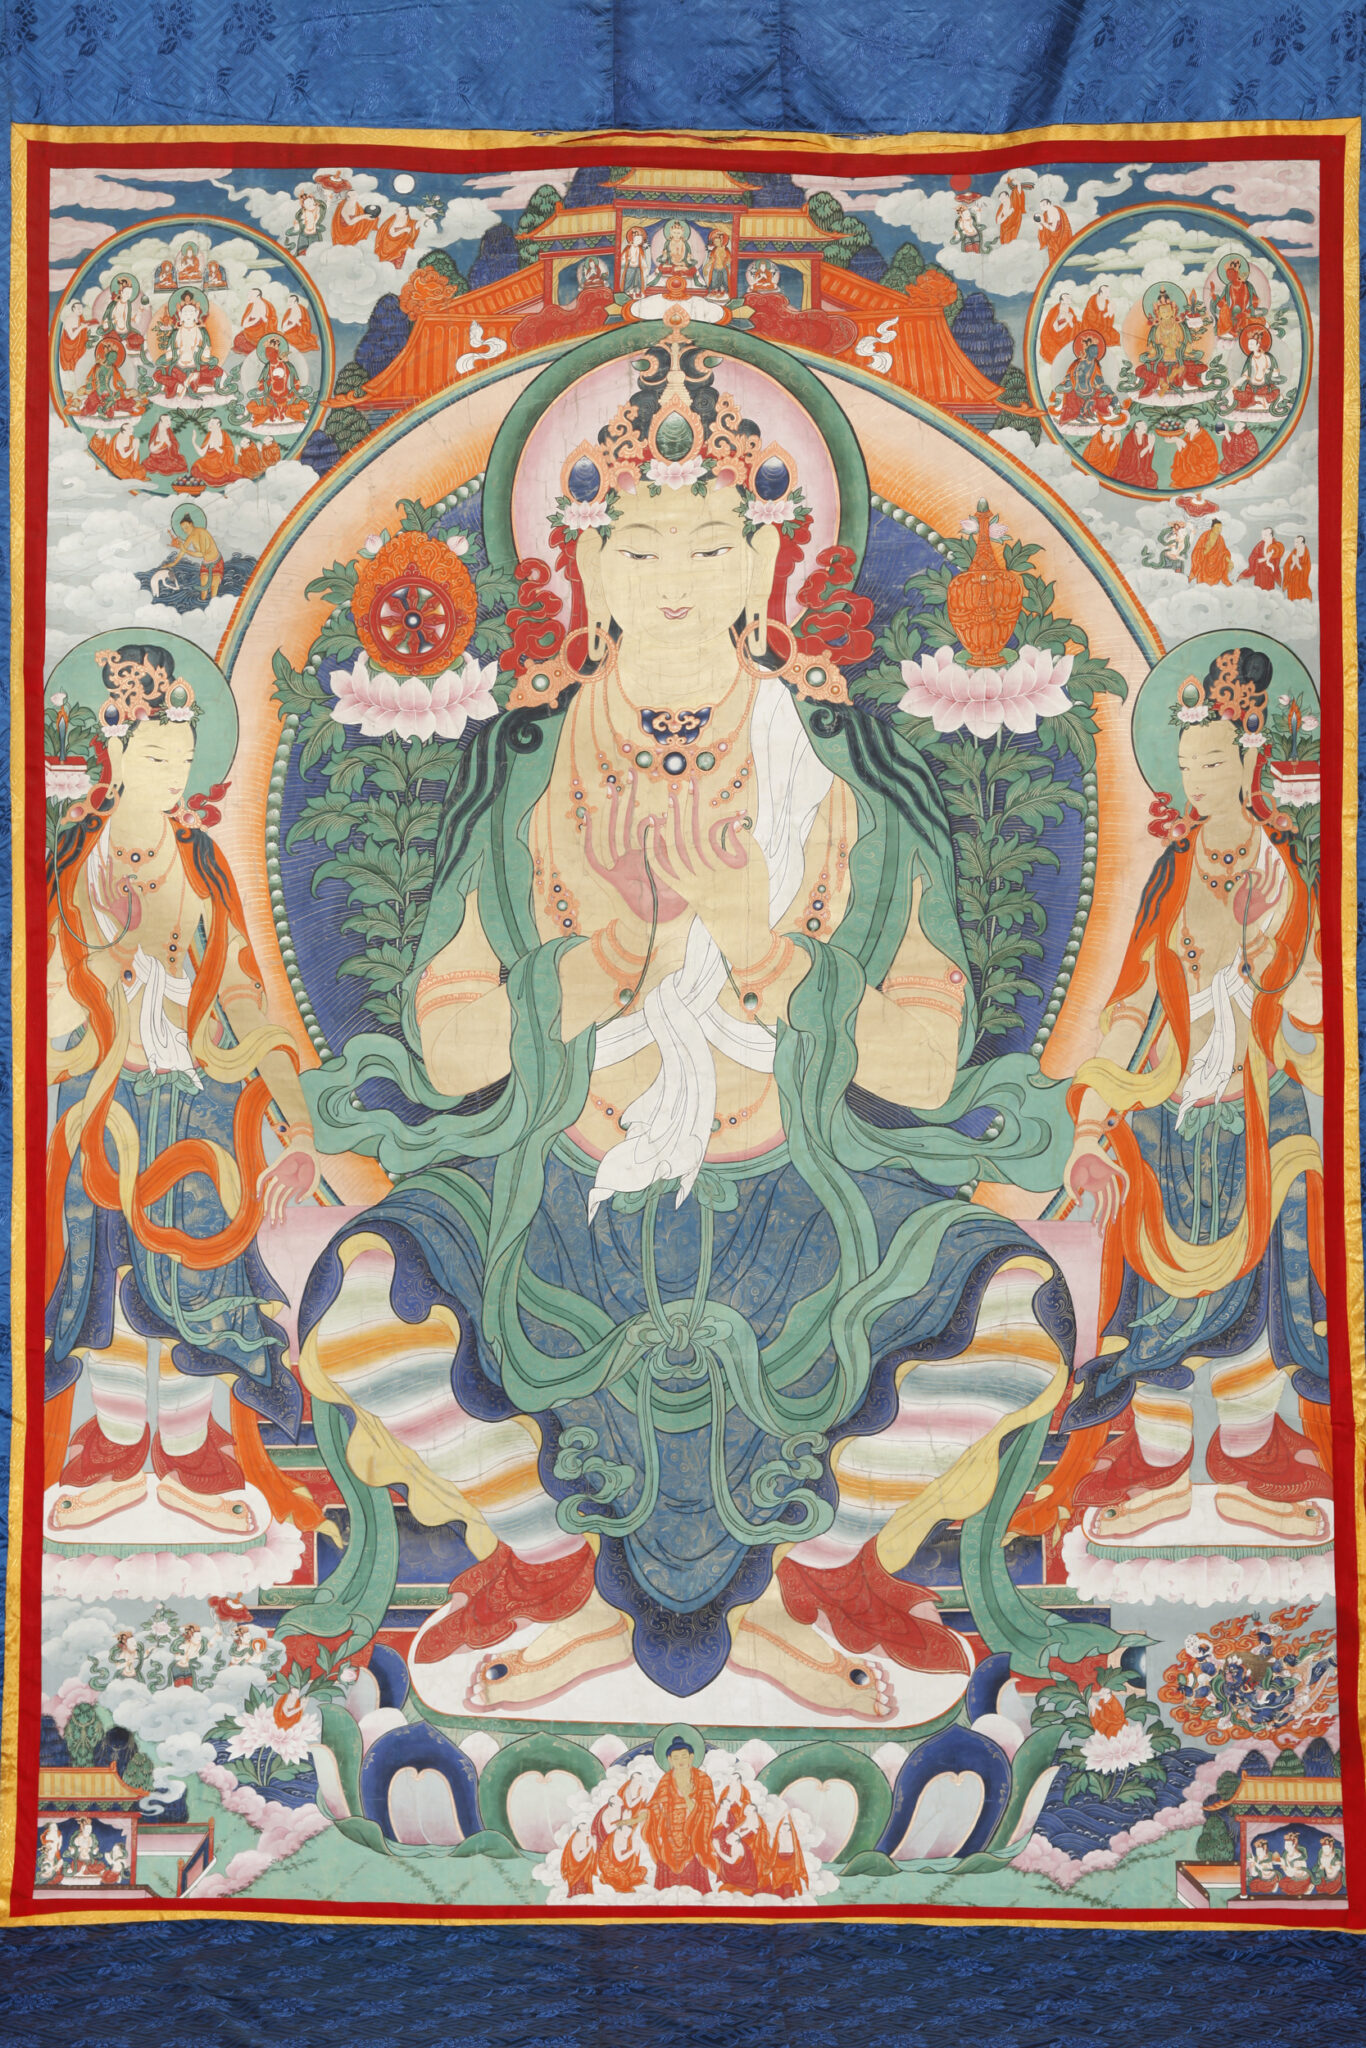 Painting mounted on blue damask depicting Buddha wearing resplendent green and blue garment